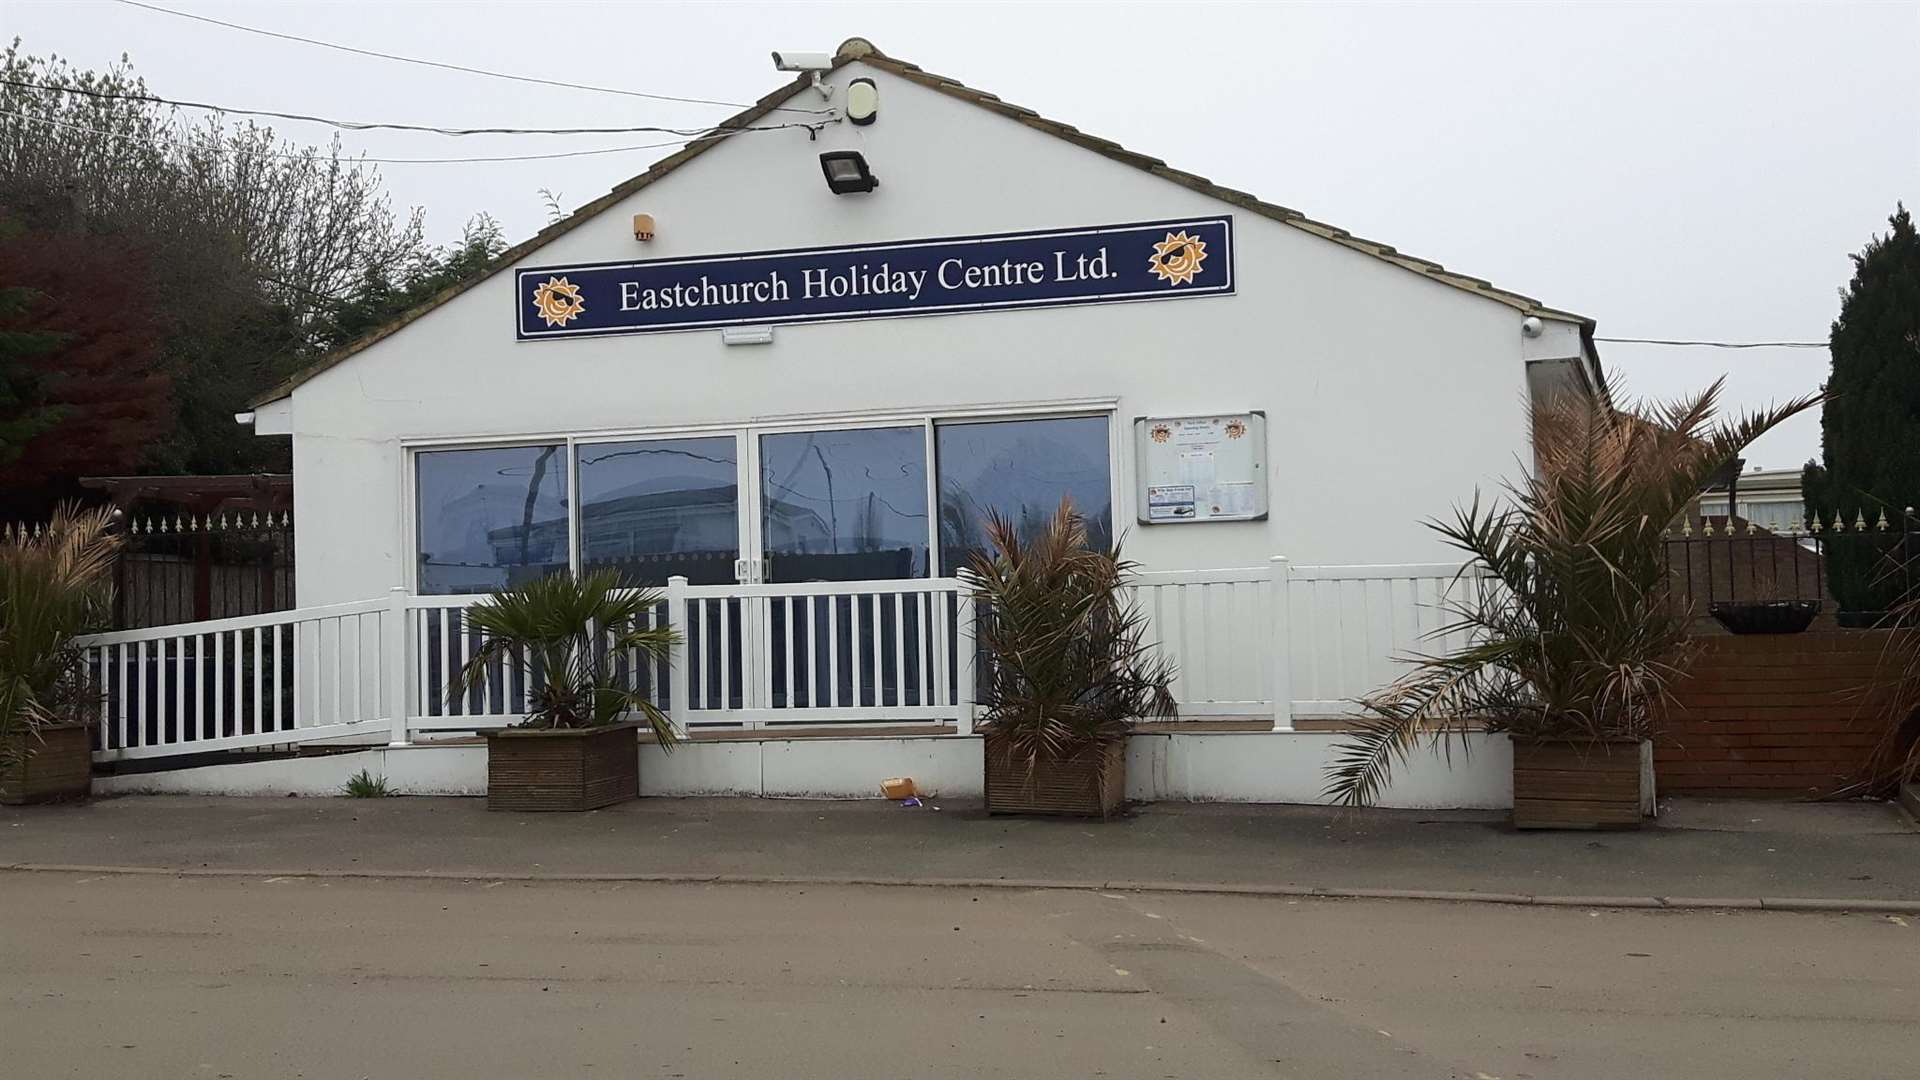 Eastchurch Holiday Centre on the Isle of Sheppey